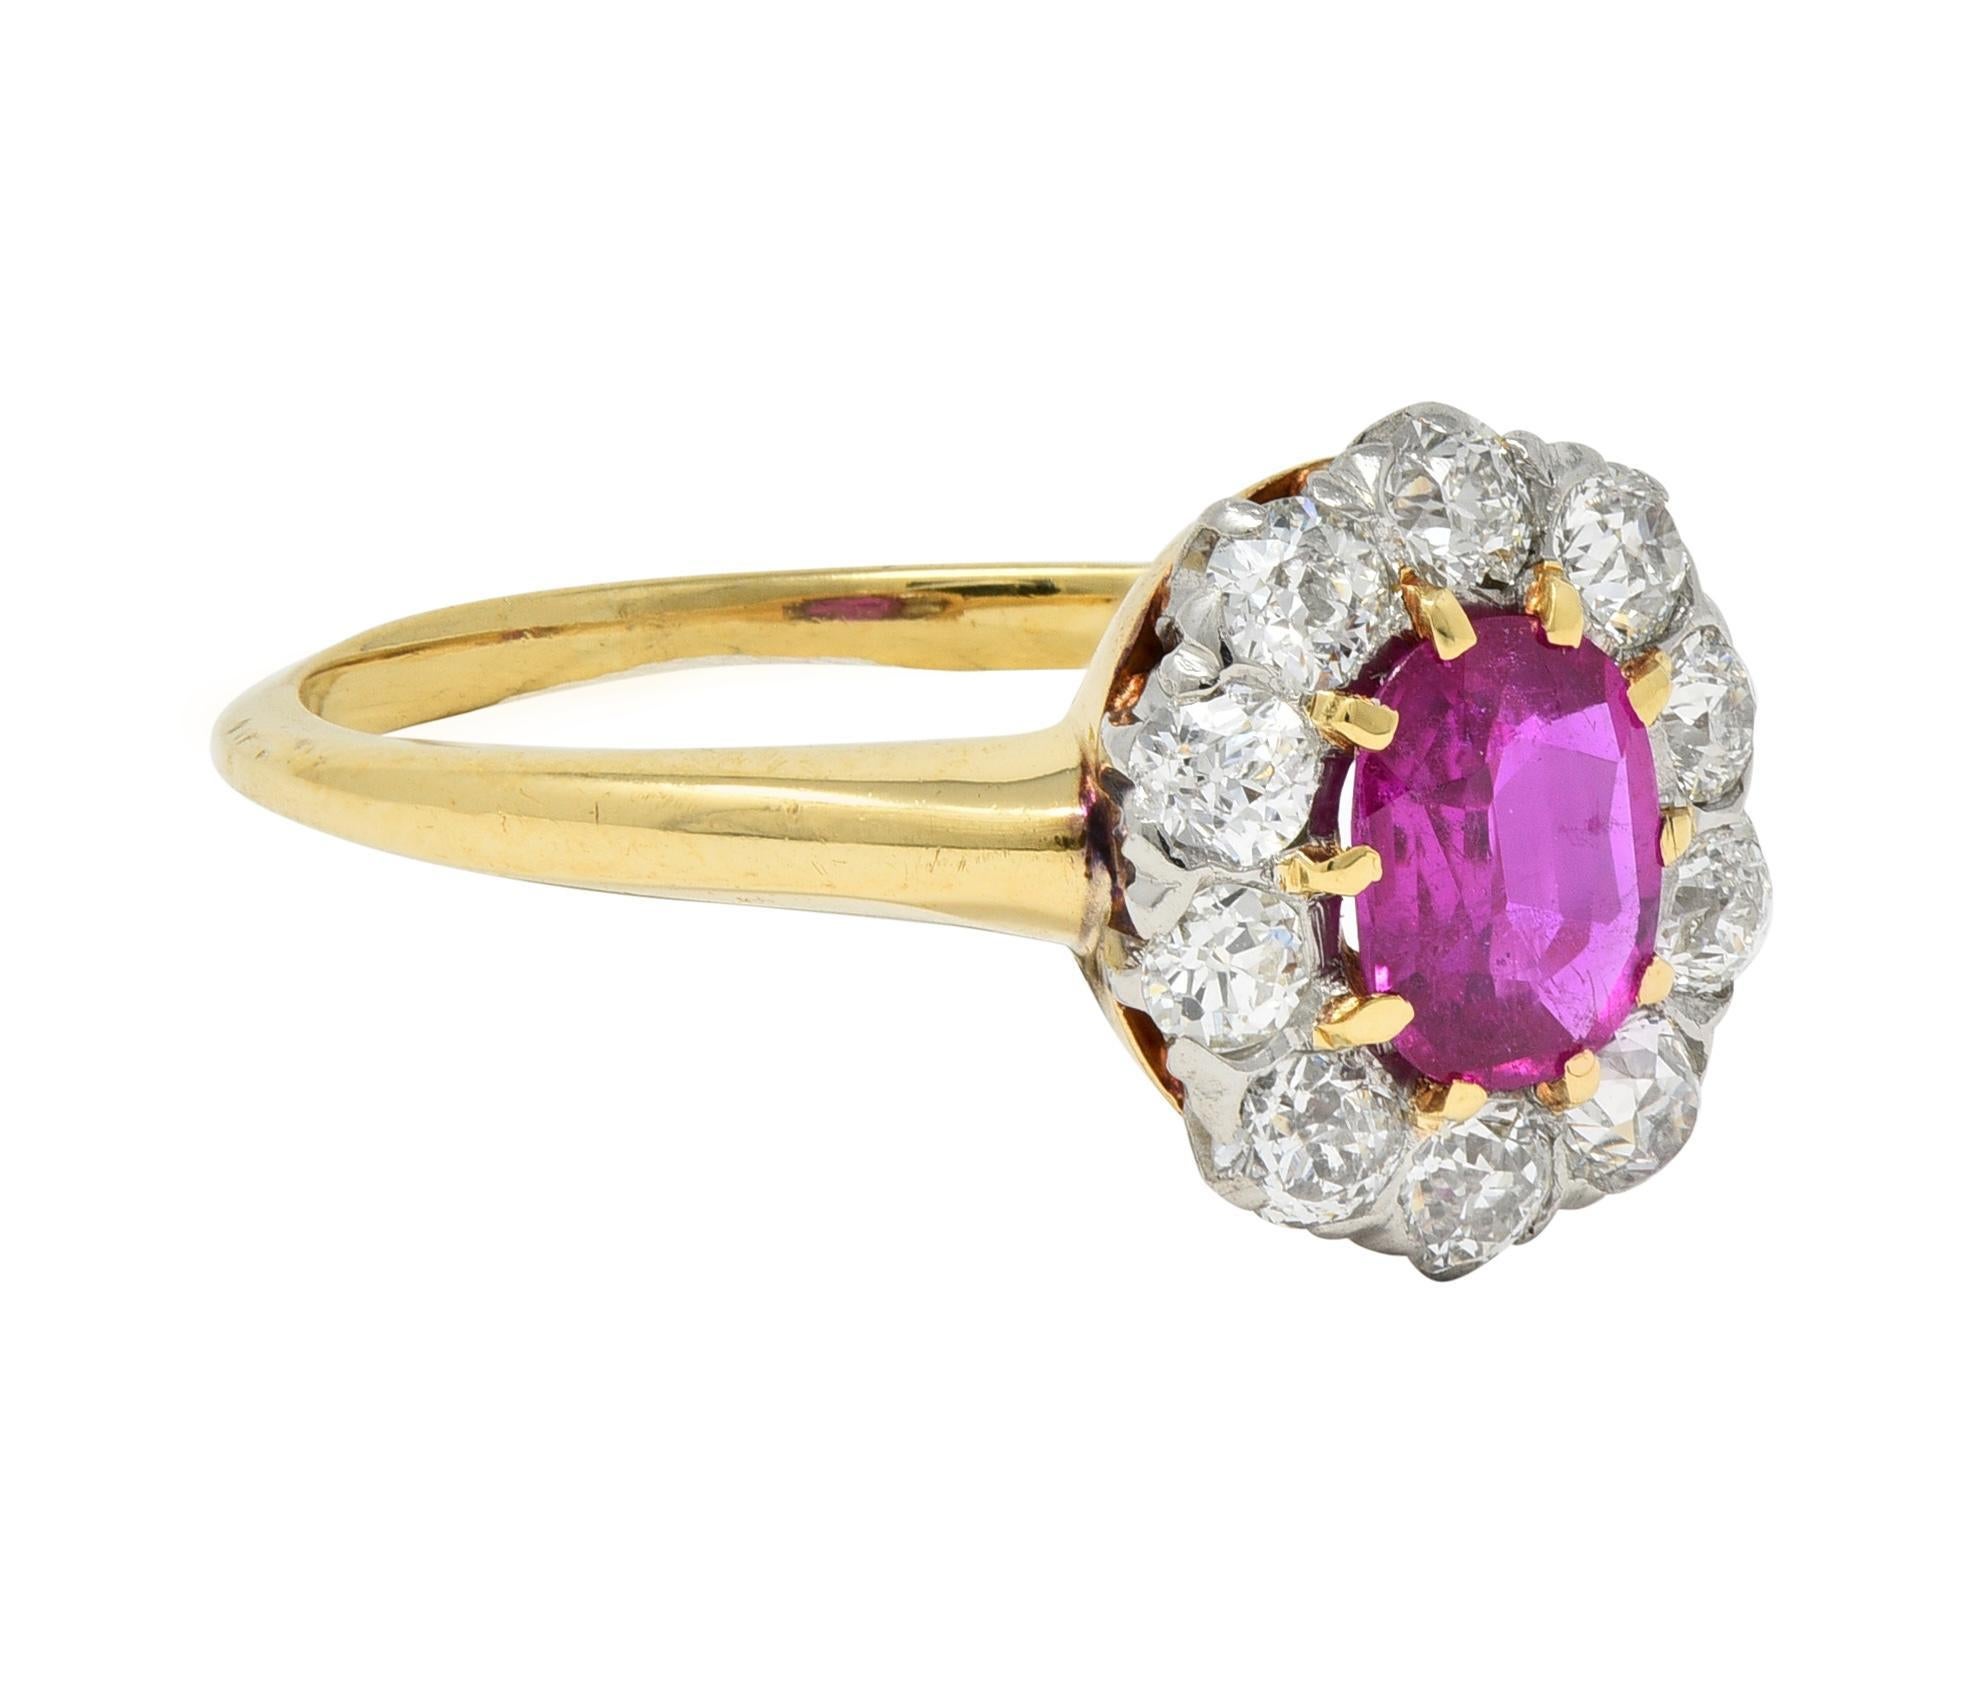 Centering an oval cut ruby weighing 0.62 carat total - transparent medium purplish red
Natural Burmese in origin with no indications of heat treatment - set with gold prongs
Accented by a halo surround of old European cut diamonds prong set in